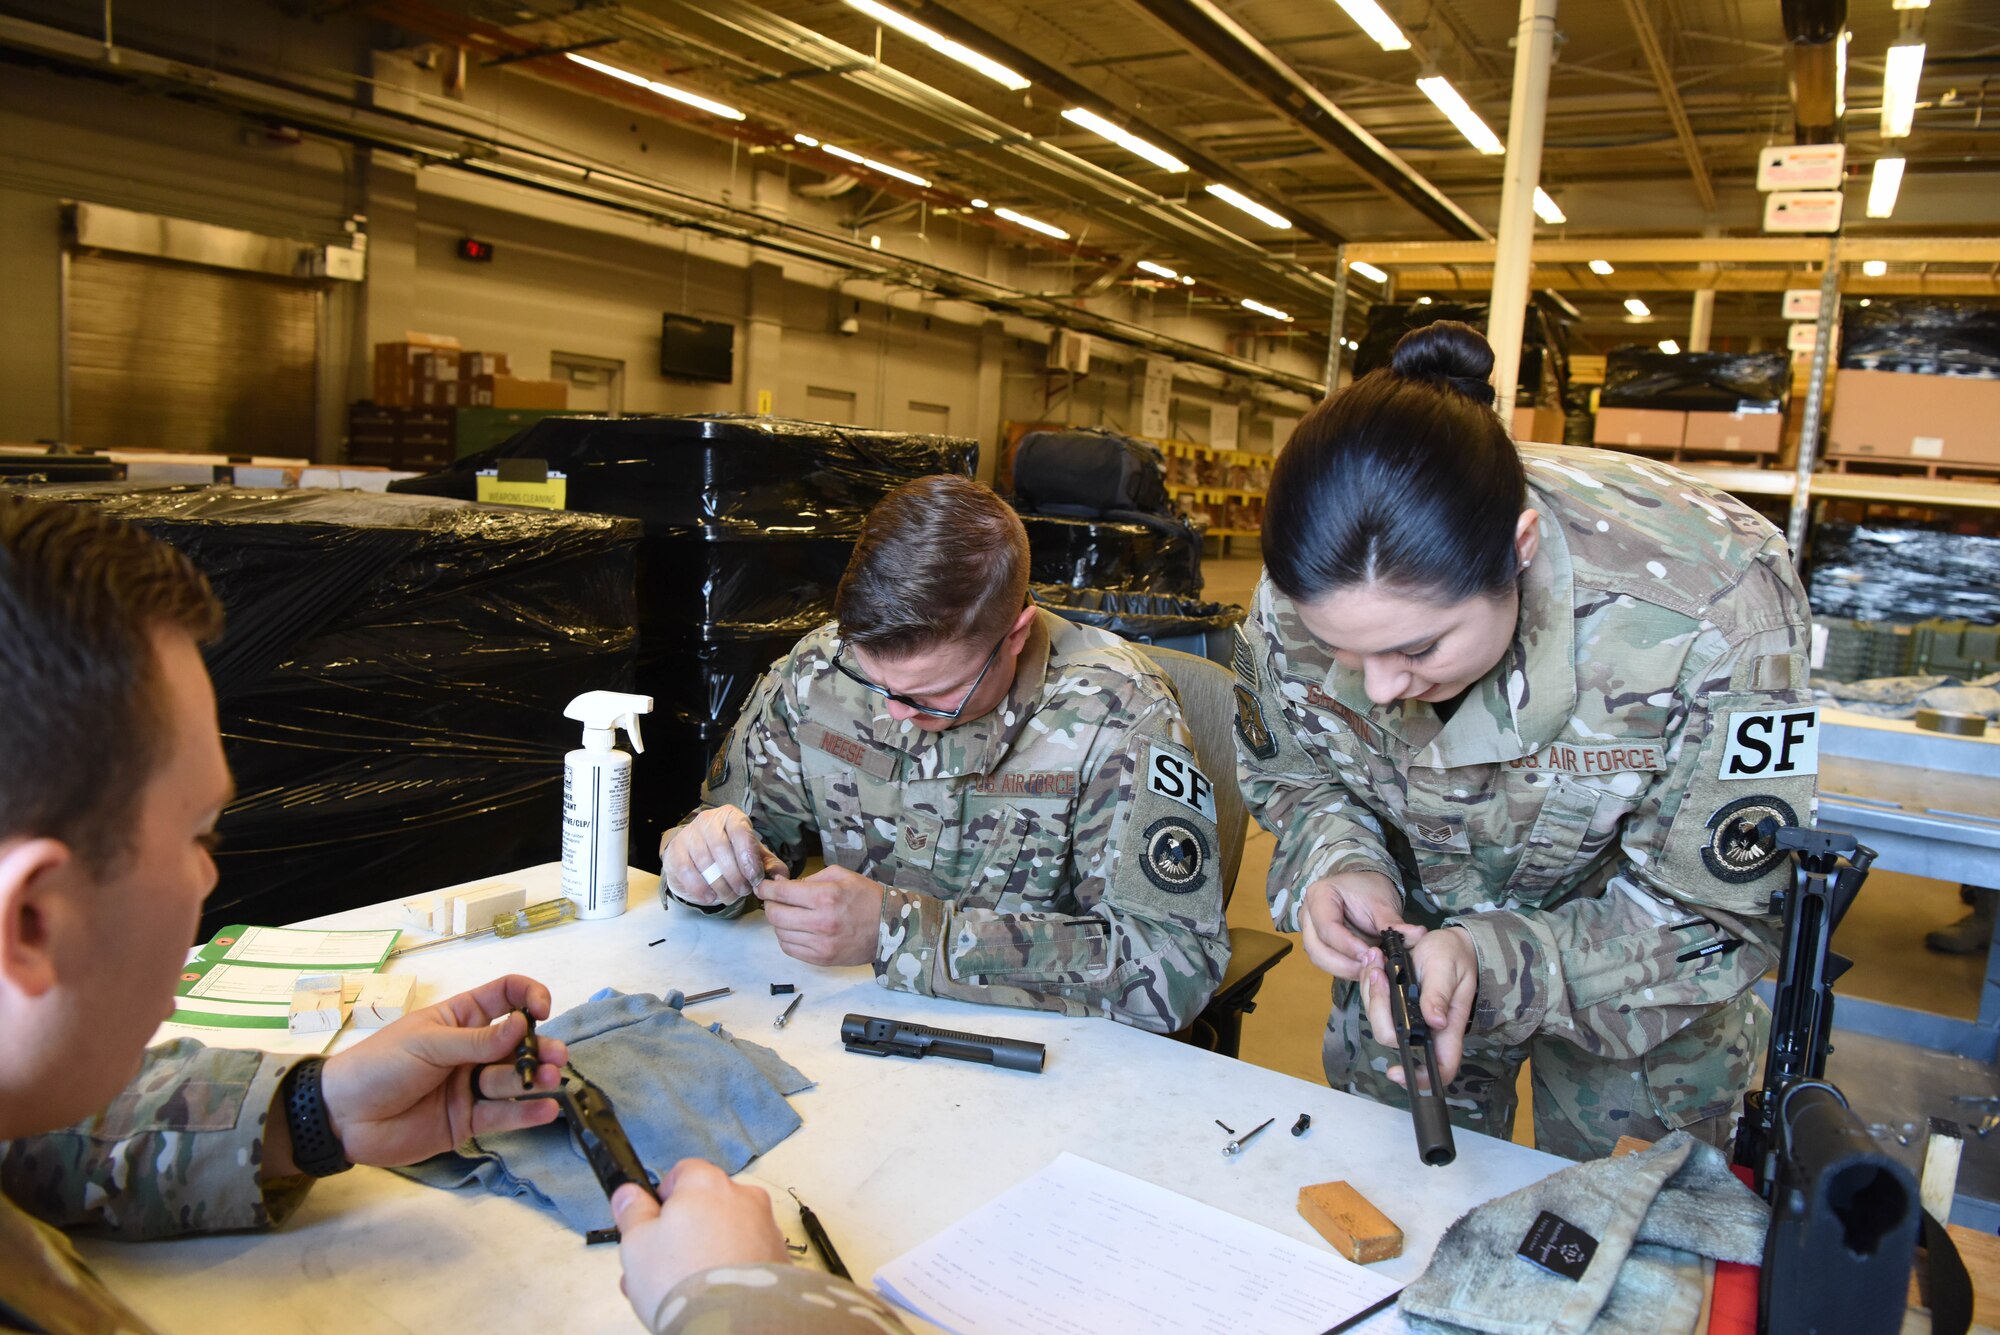 Staff Sgt. Elizabeth Gregson, a 28th Security Forces Squadron combat arms instructor, inspects an M4 bolt carrier at Ellsworth Air Force Base, S.D., Sept. 10, 2018. Members assigned to the 28th Security Forces Squadron combat arms training and maintenance flight conducted their biannual inspection of all weapons on base to ensure they are ready for use in a deployed environment and for training purposes. (U.S. Air Force photo by Airman 1st Class Thomas Karol)